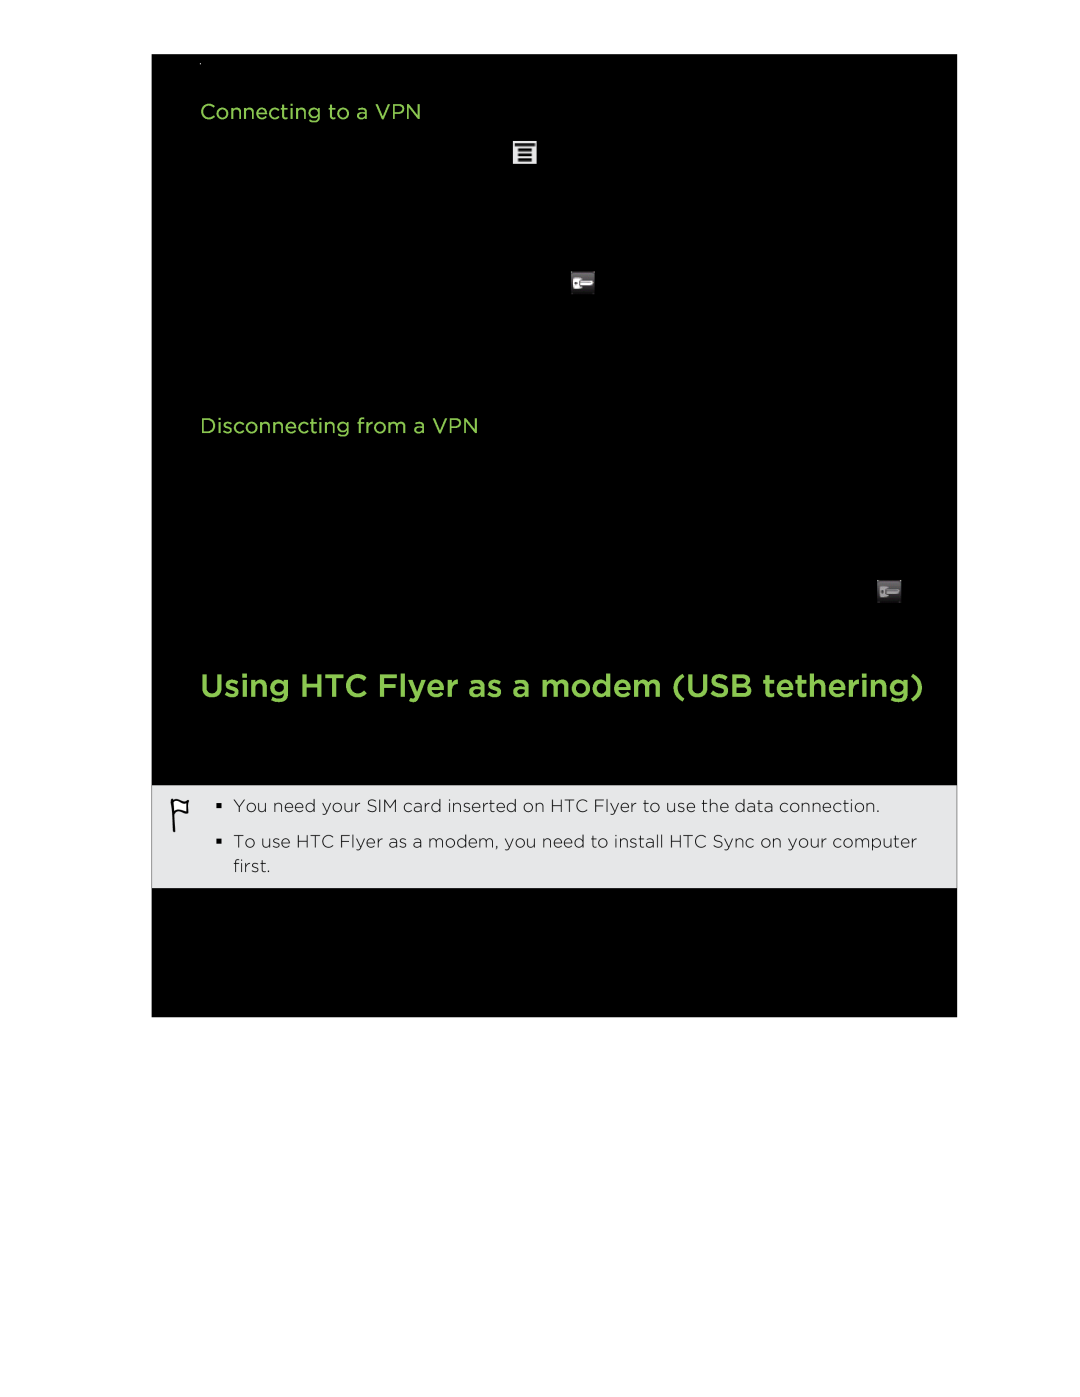 HTC HTCFlyerP512 manual Using HTC Flyer as a modem USB tethering, Connecting to a VPN, Disconnecting from a VPN 